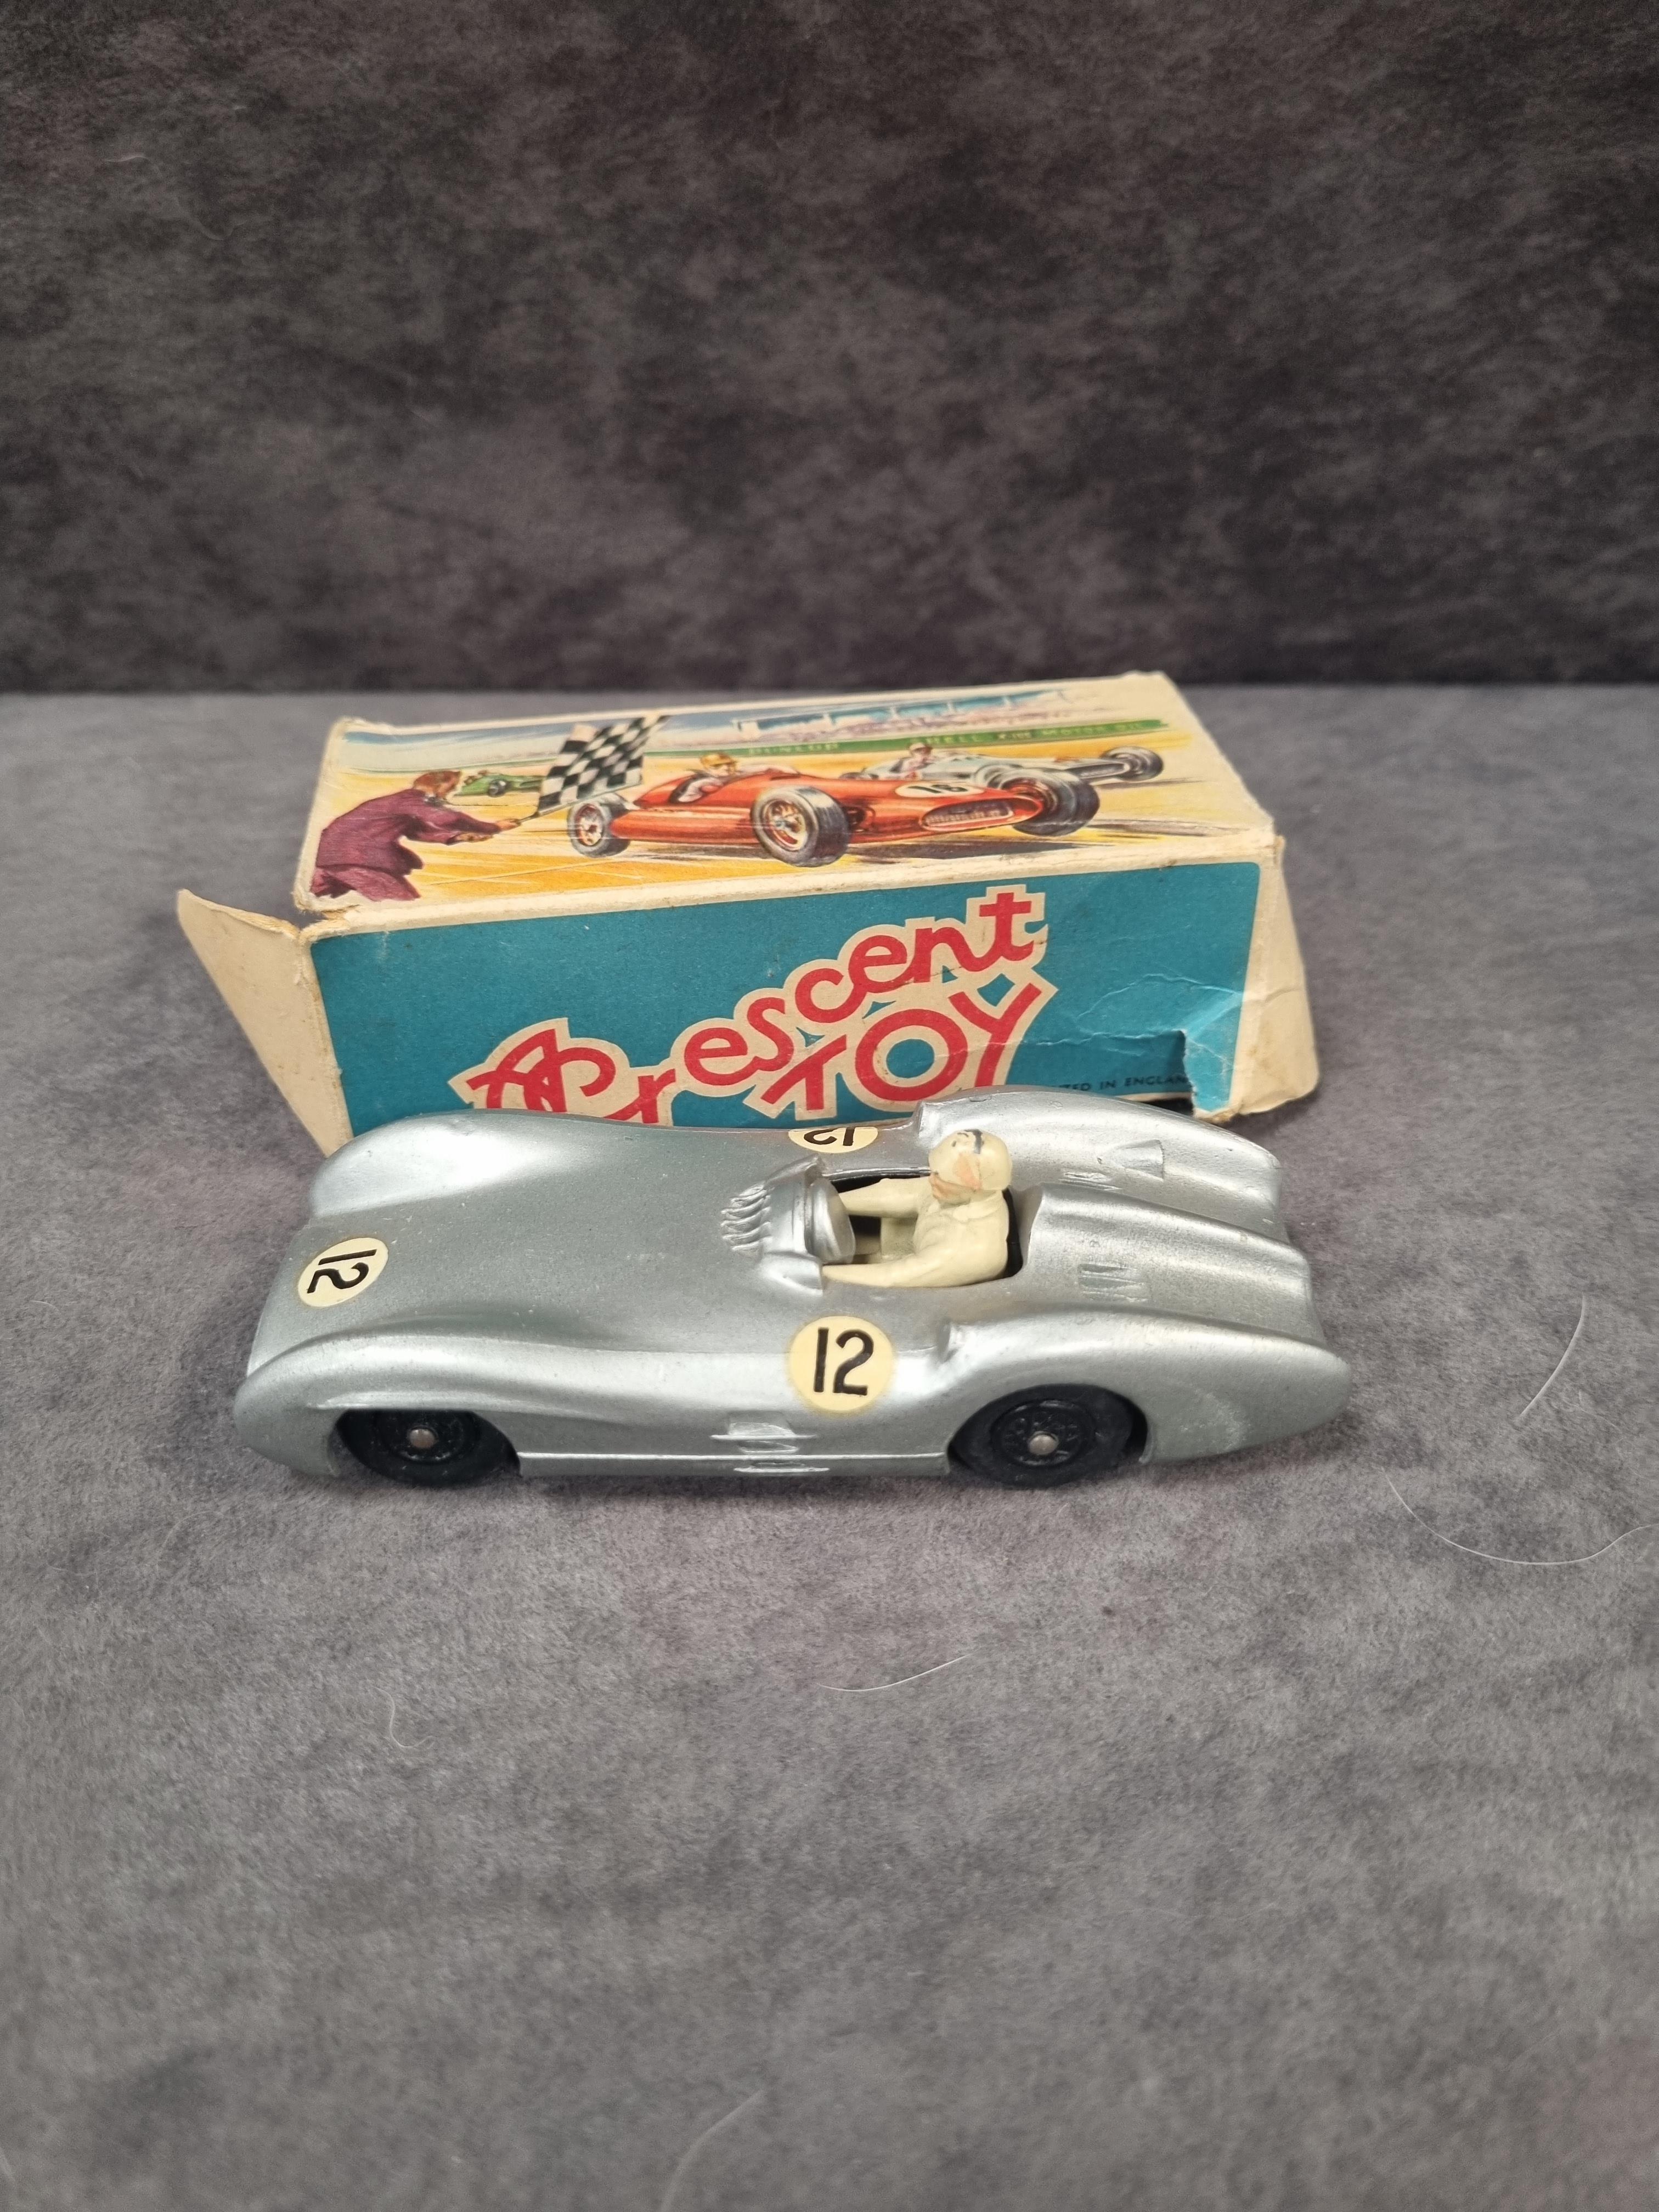 Crescent Toys diecast #1284 Mercedes Benz 2.5 Grand Prix Racing car in box (missing one end flap and - Image 3 of 4